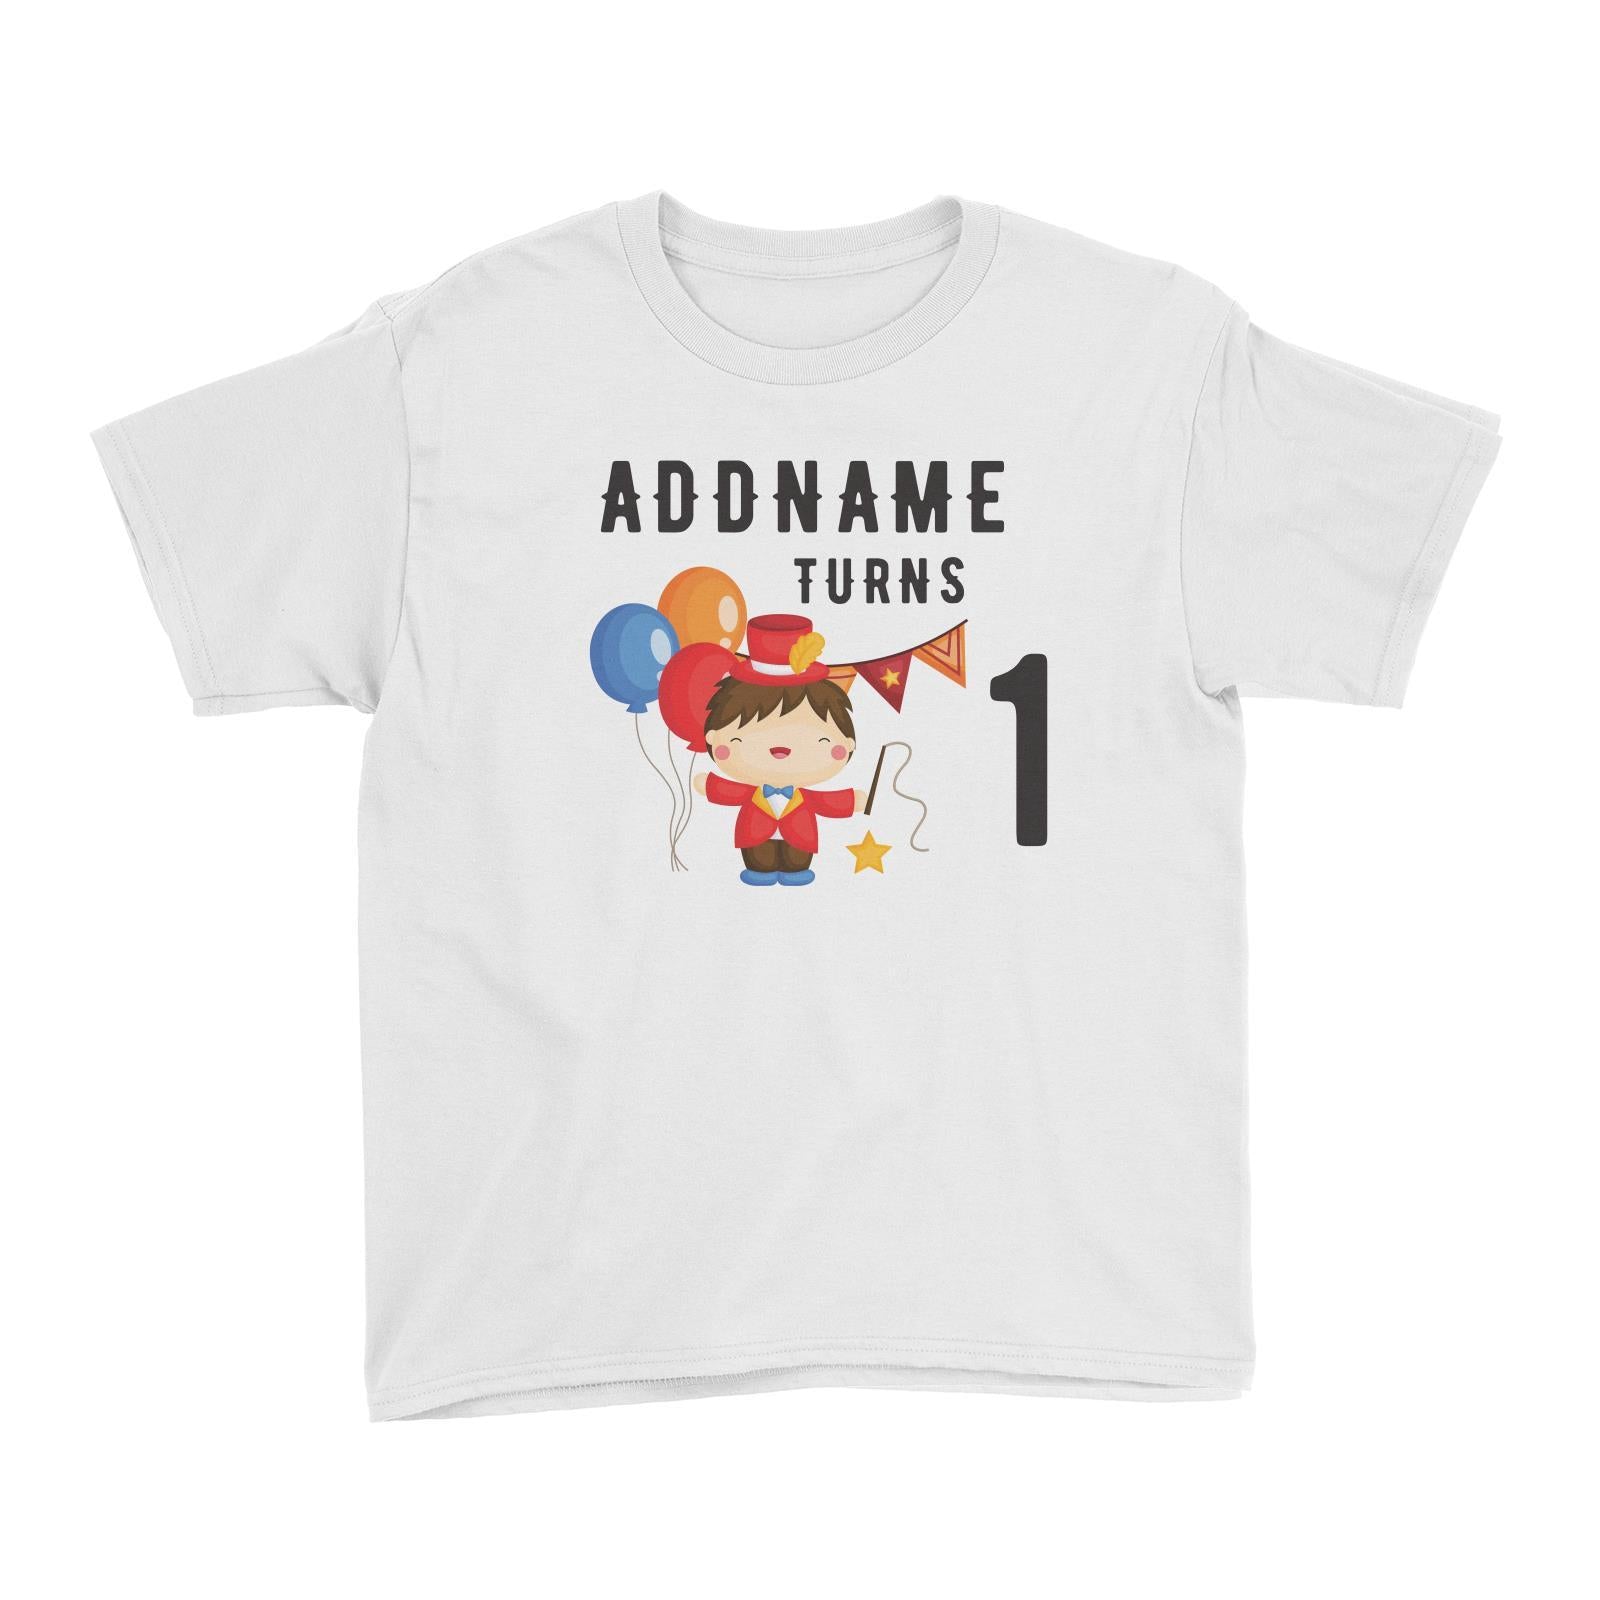 Birthday Circus Happy Boy Leader of Performance Addname Turns 1 Kid's T-Shirt